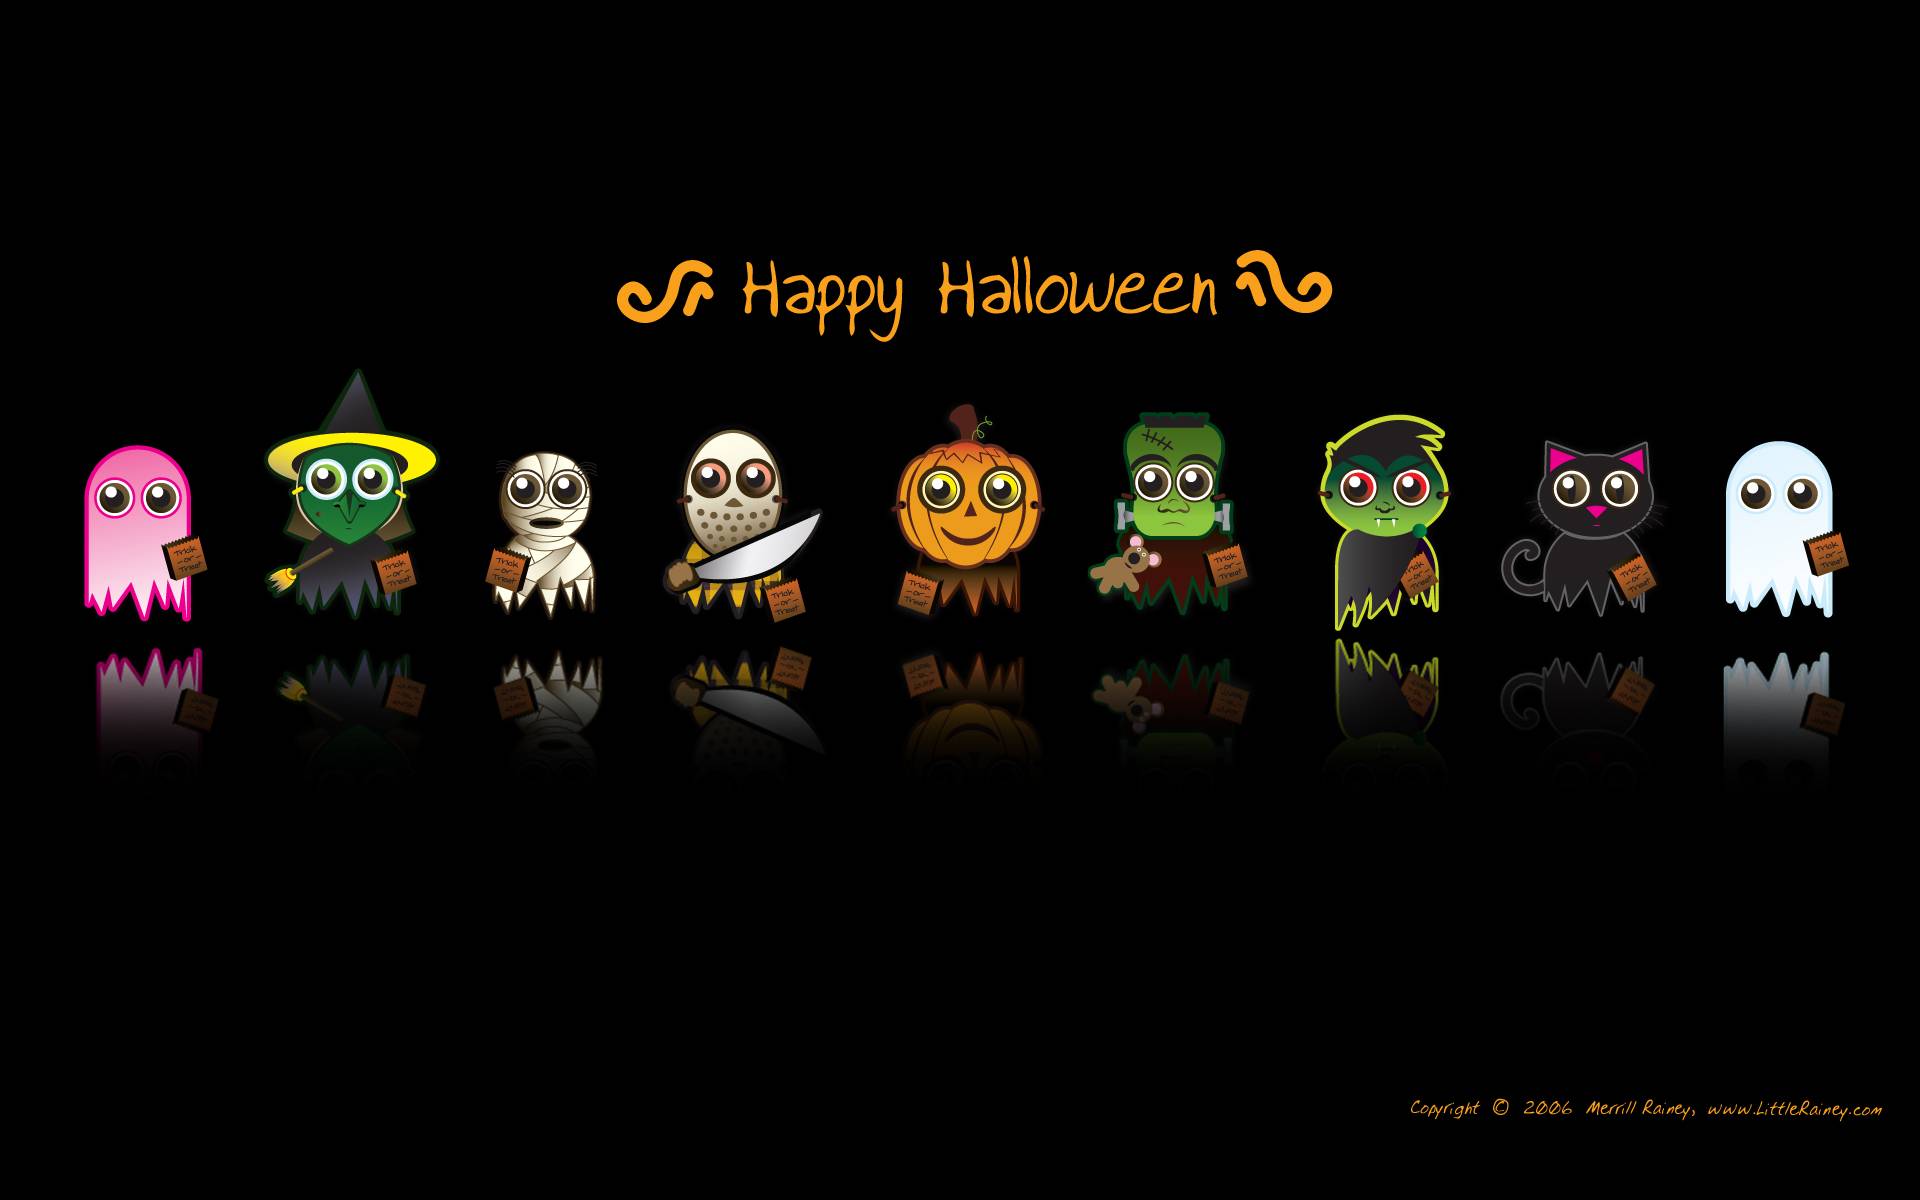 Happy Halloween with Guitars Wallpaper at